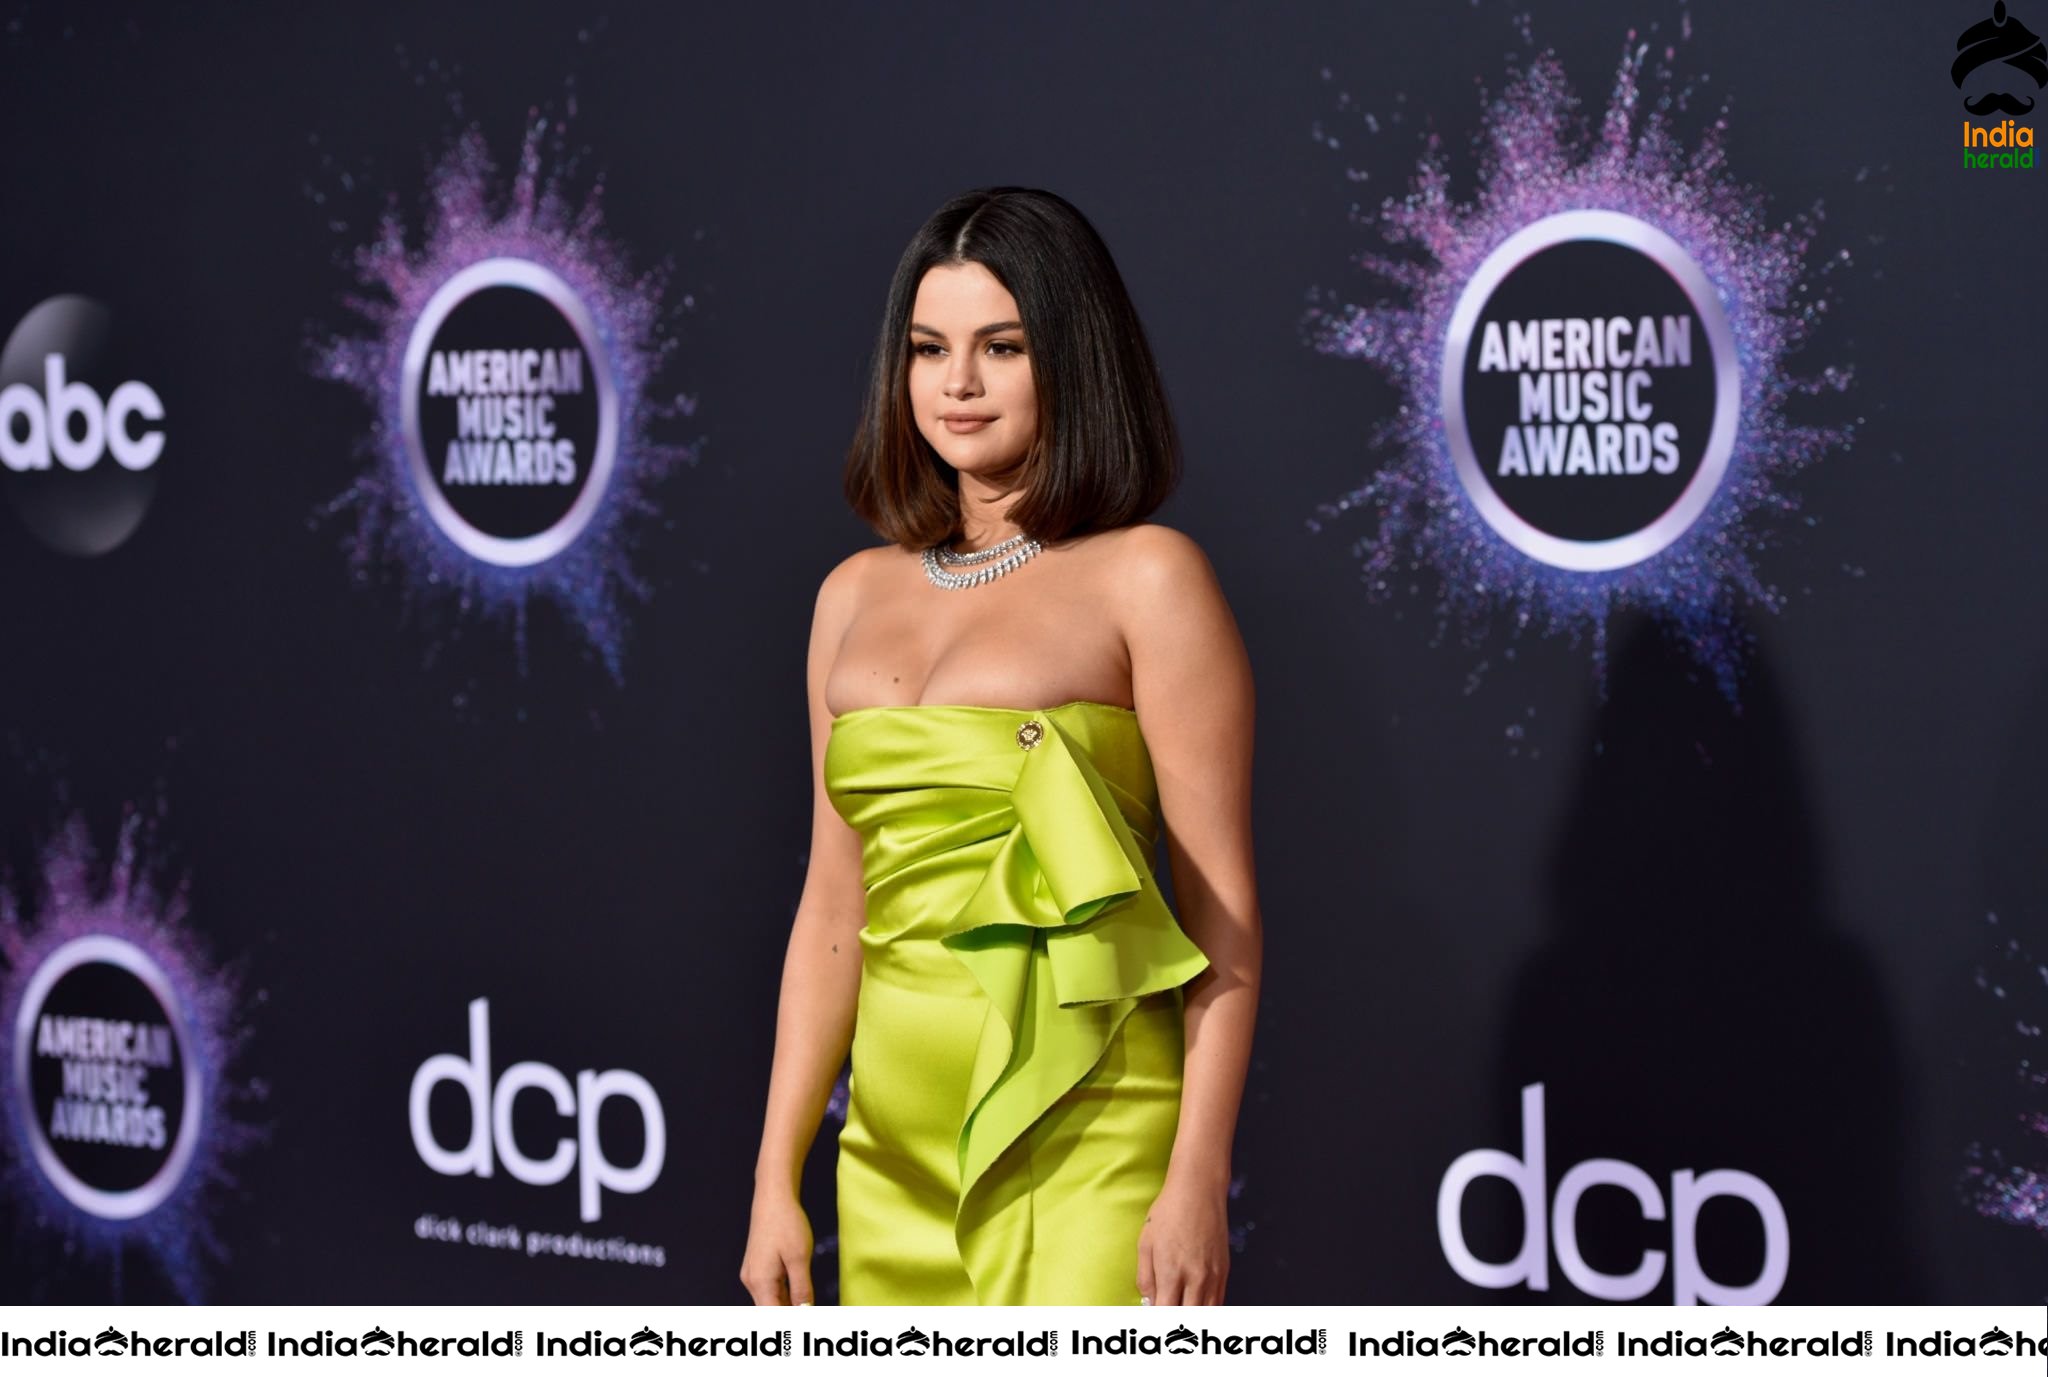 Selena Gomez at the 2019 American Music Awards in Los Angeles Set 1